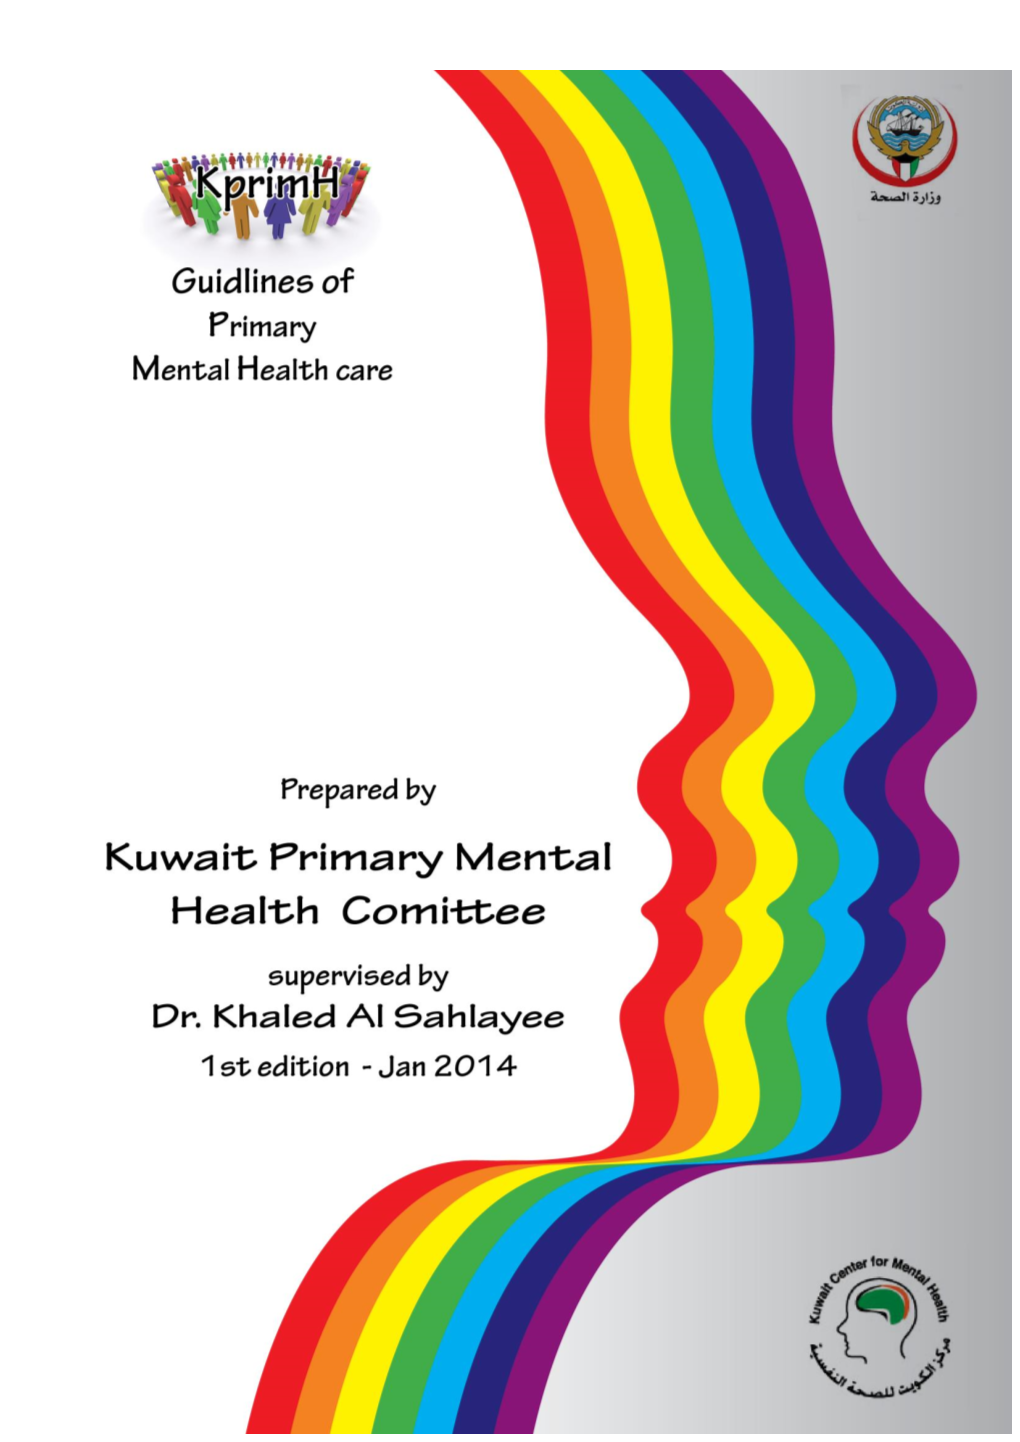 Guidelines for Primary Mental Health Care